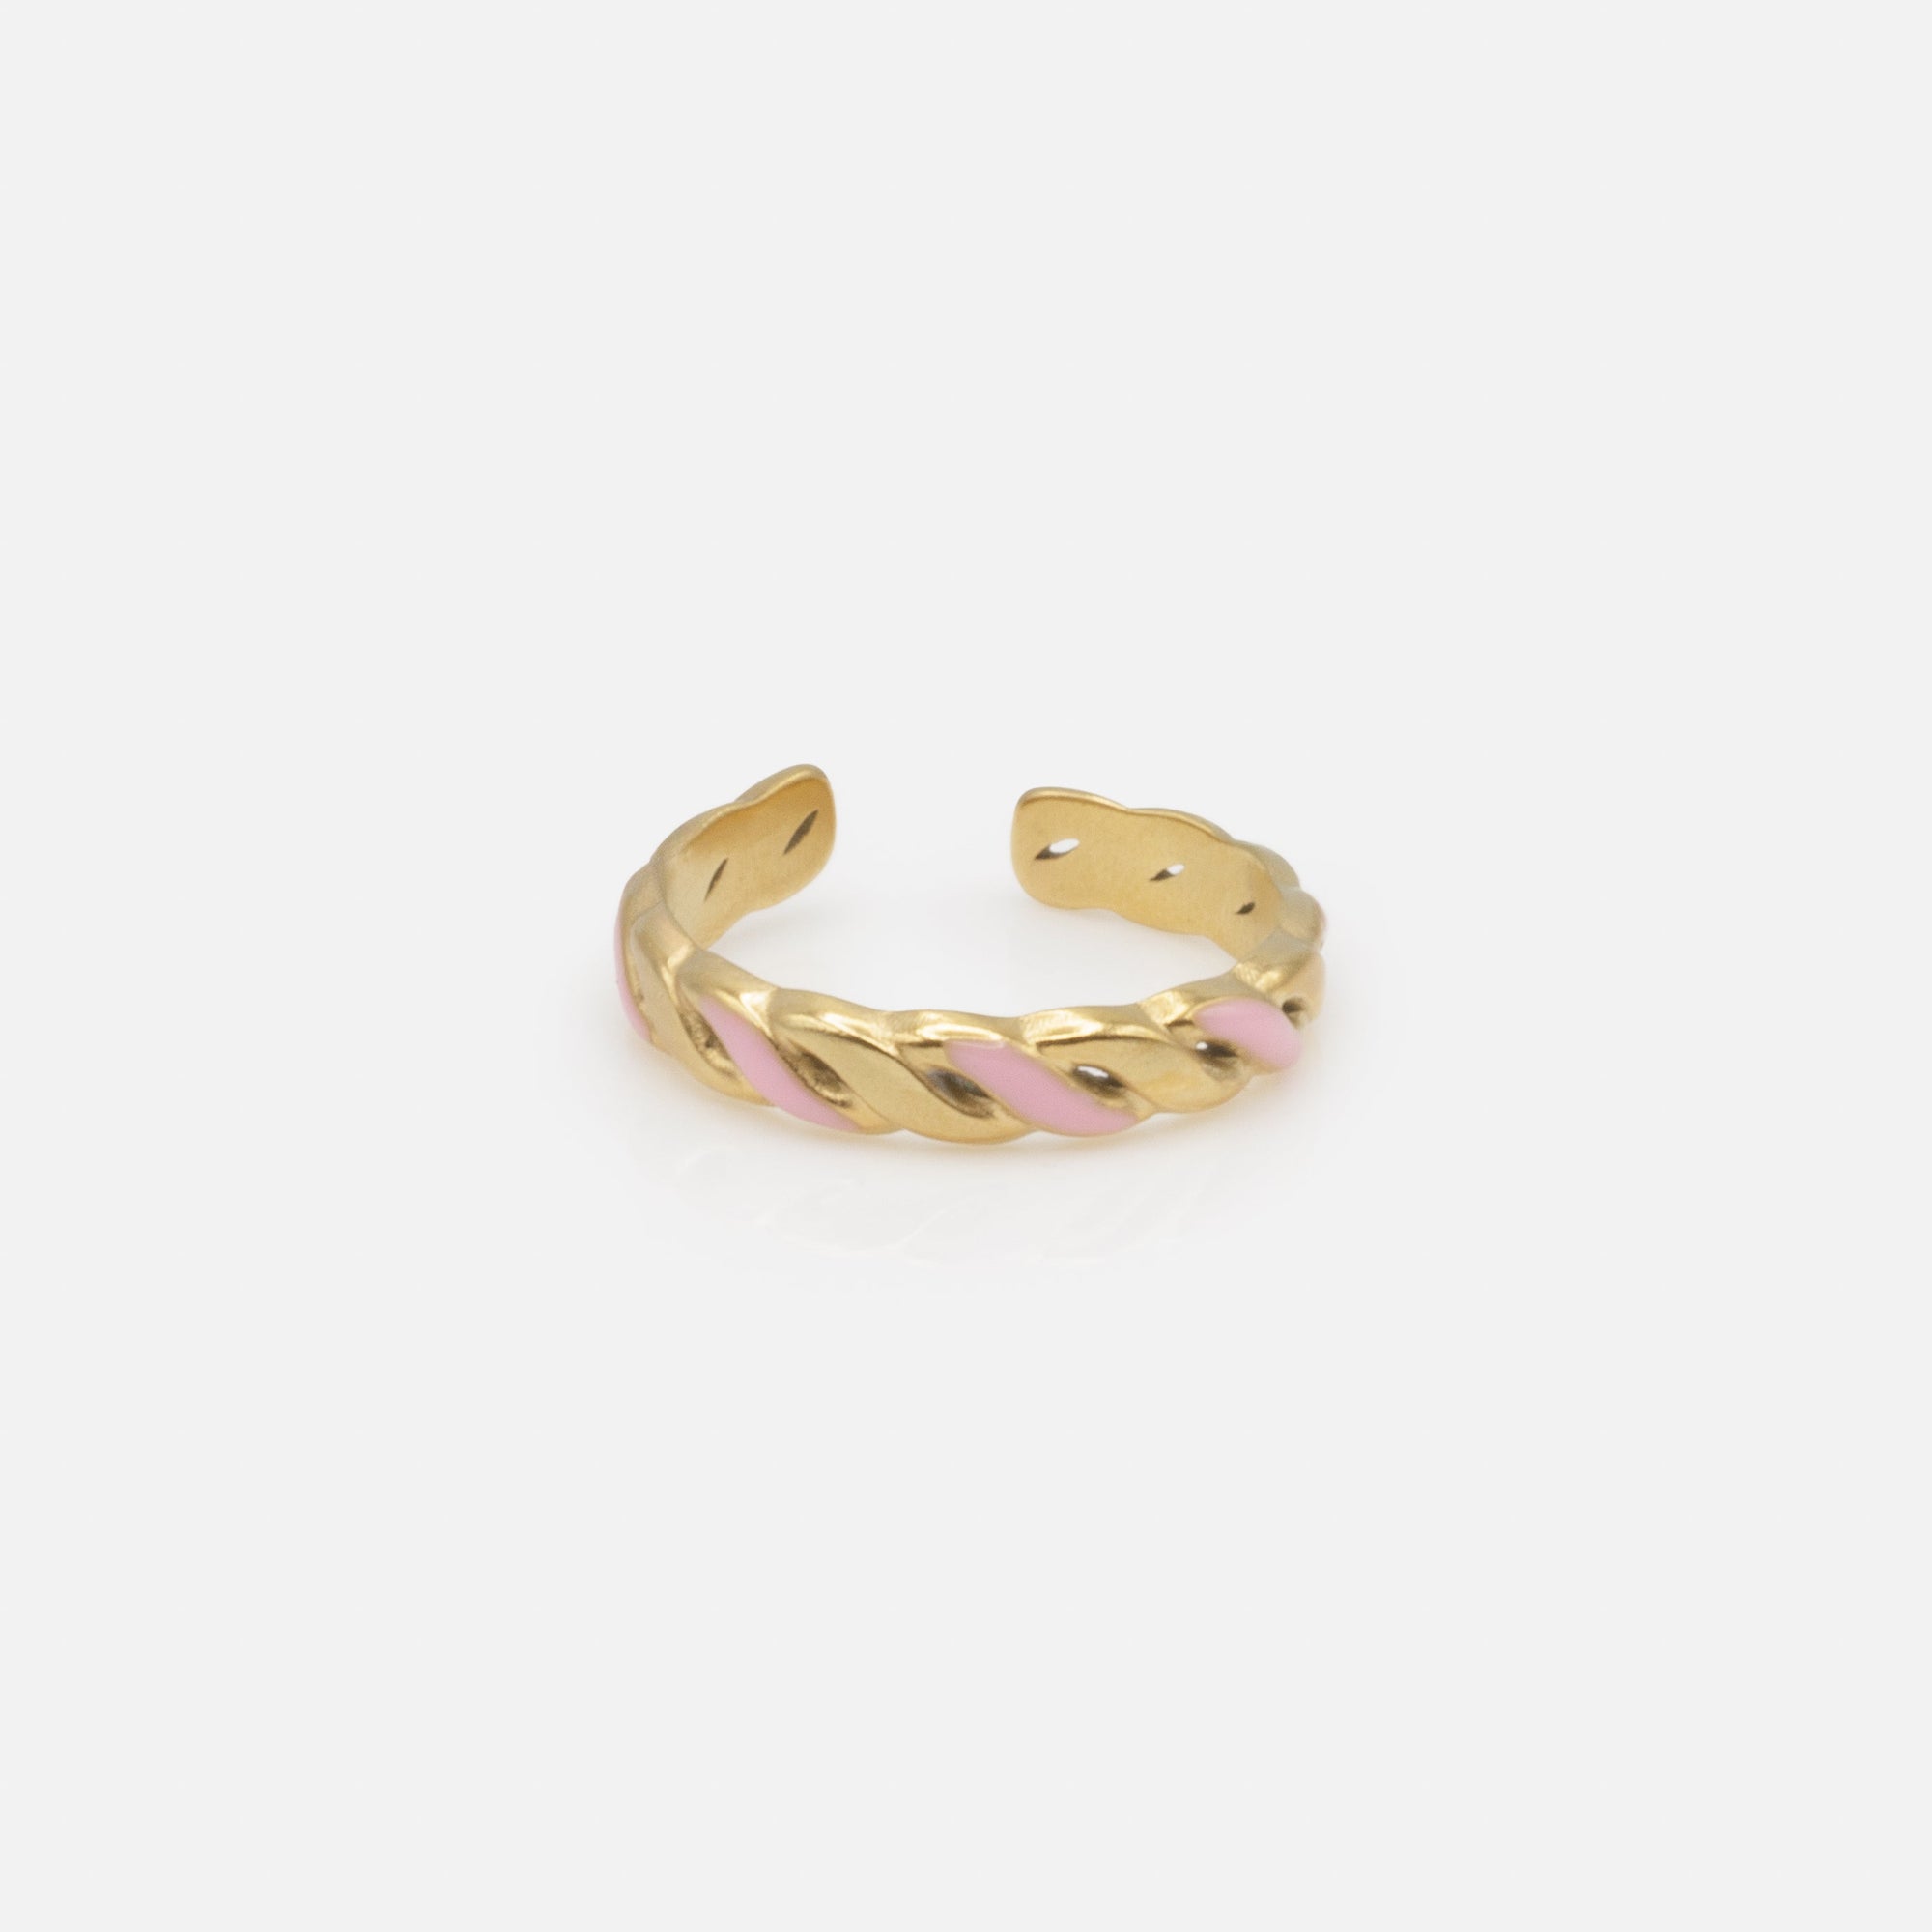 Twisted gold ring with rose stainless steel additions